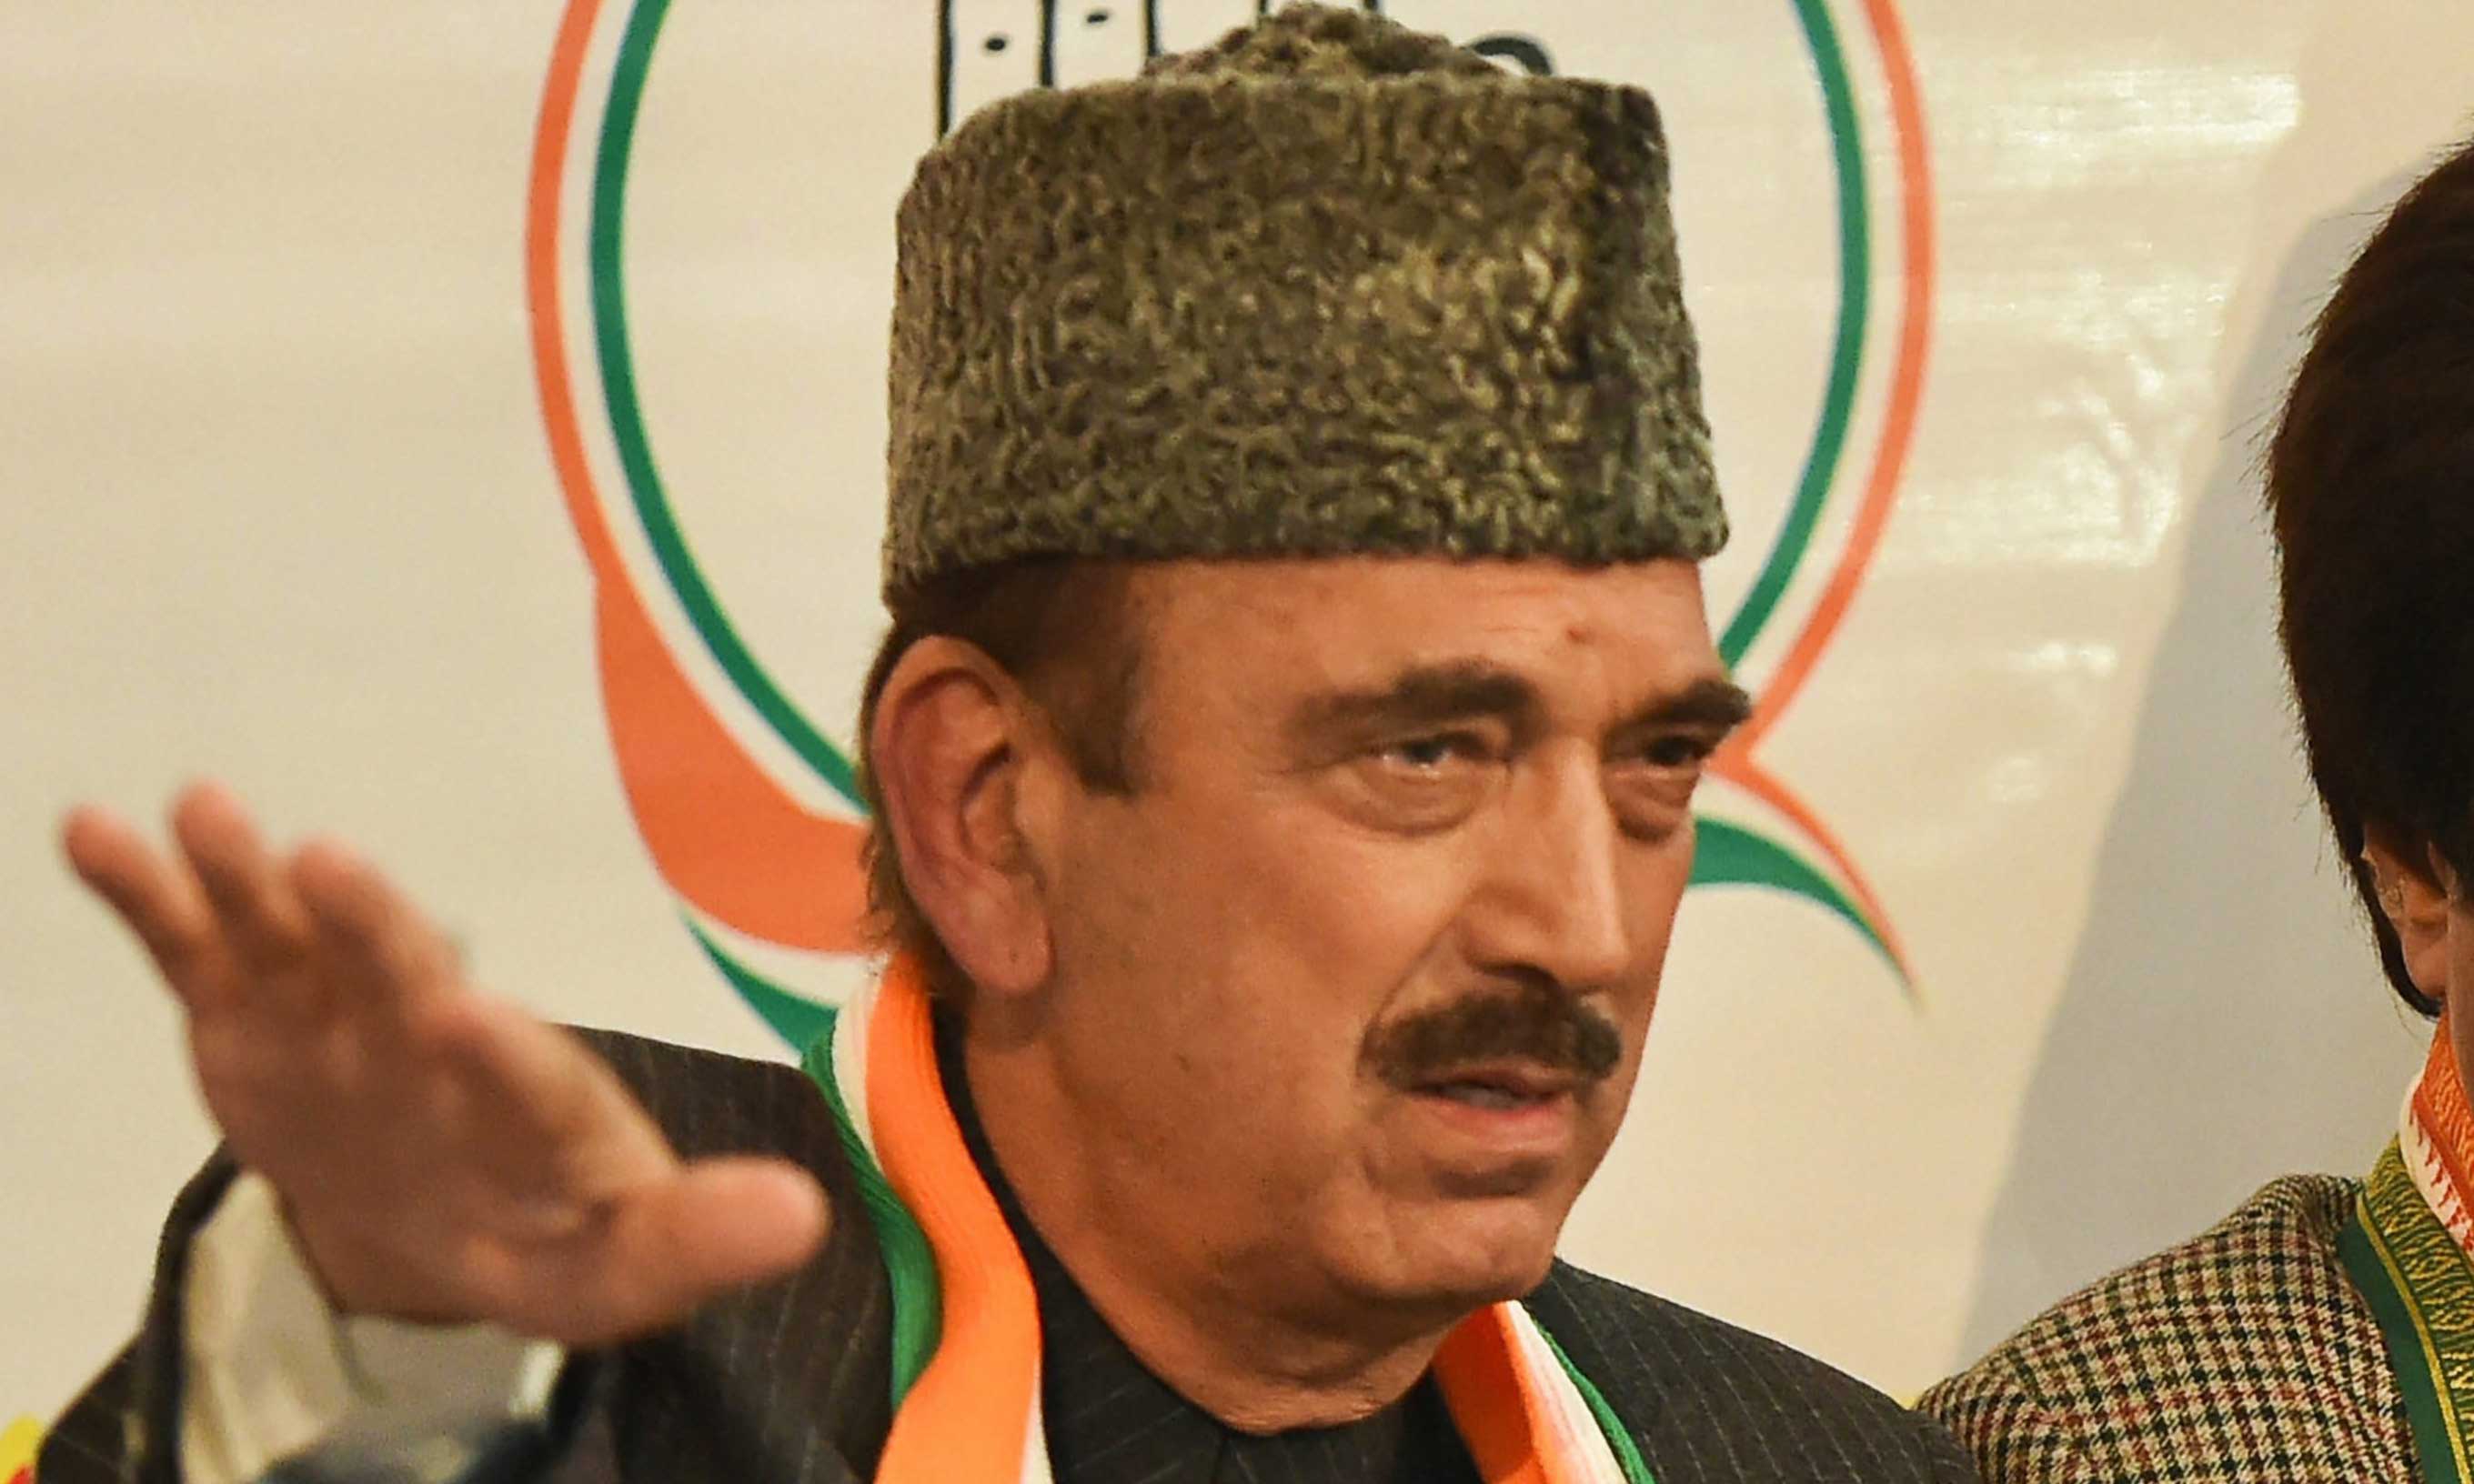 Ghulam Nabi Azad was scheduled to meet people at the Dak Bungalow, which has been declared a jail, and had to change the venue after authorities refused him permission, a local Congress leader said.
